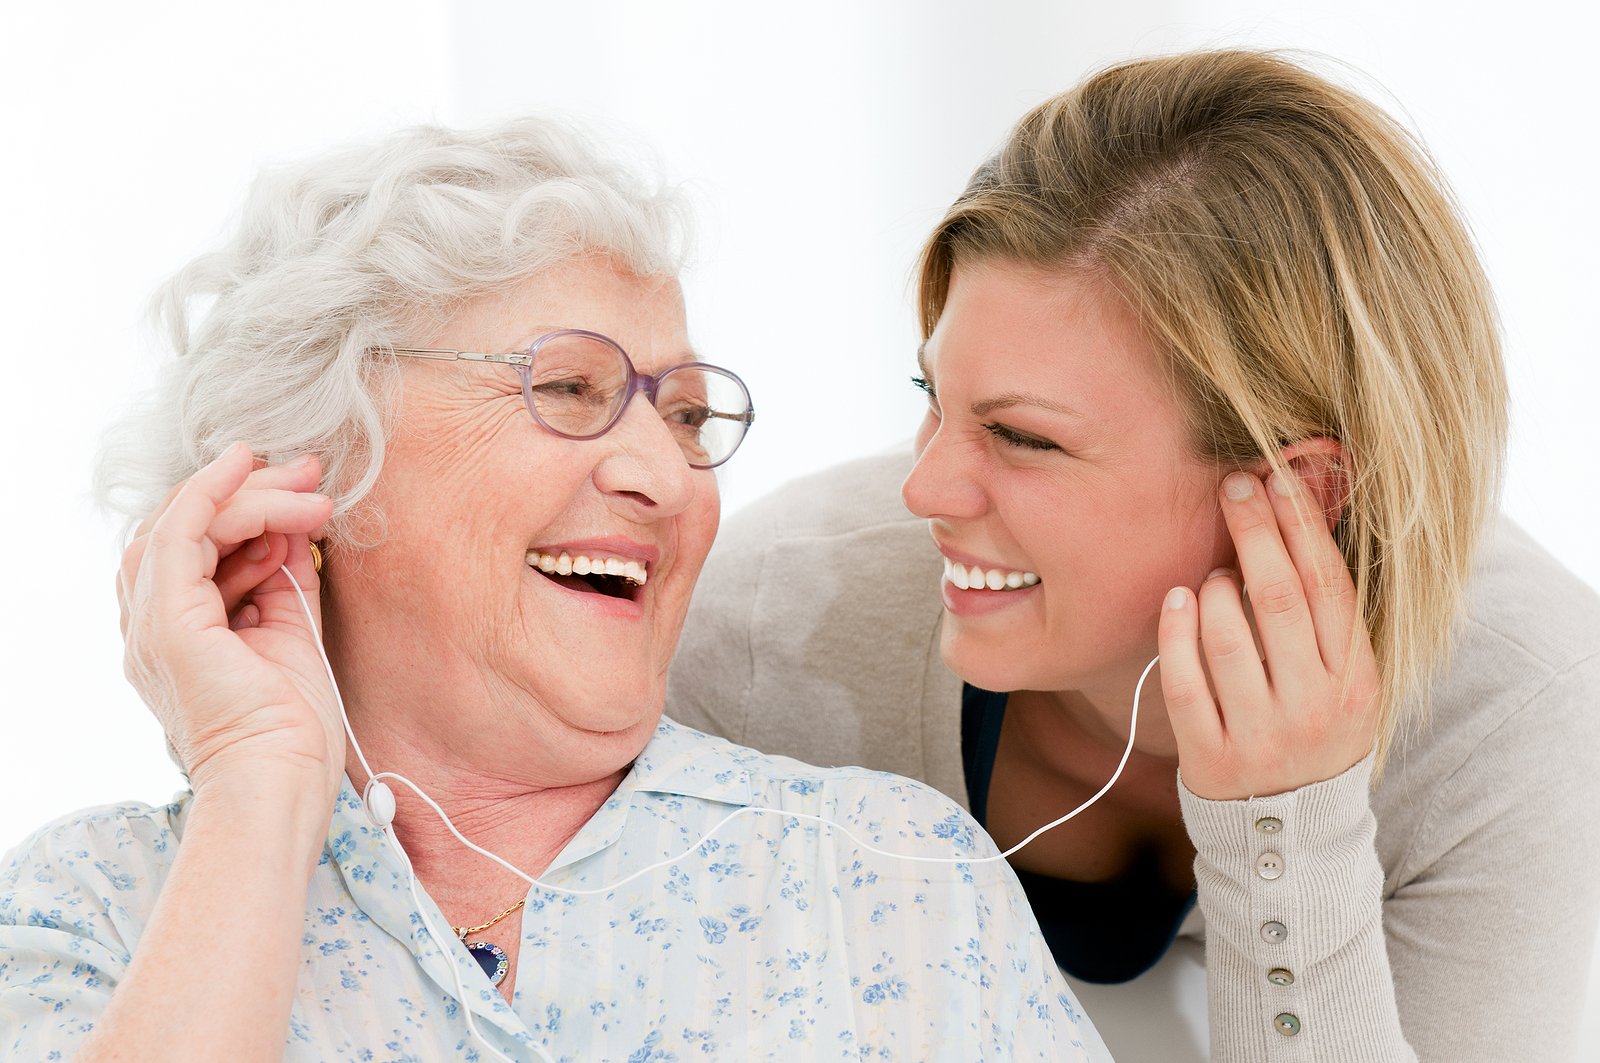 The Benefits of Music for People With Memory Loss